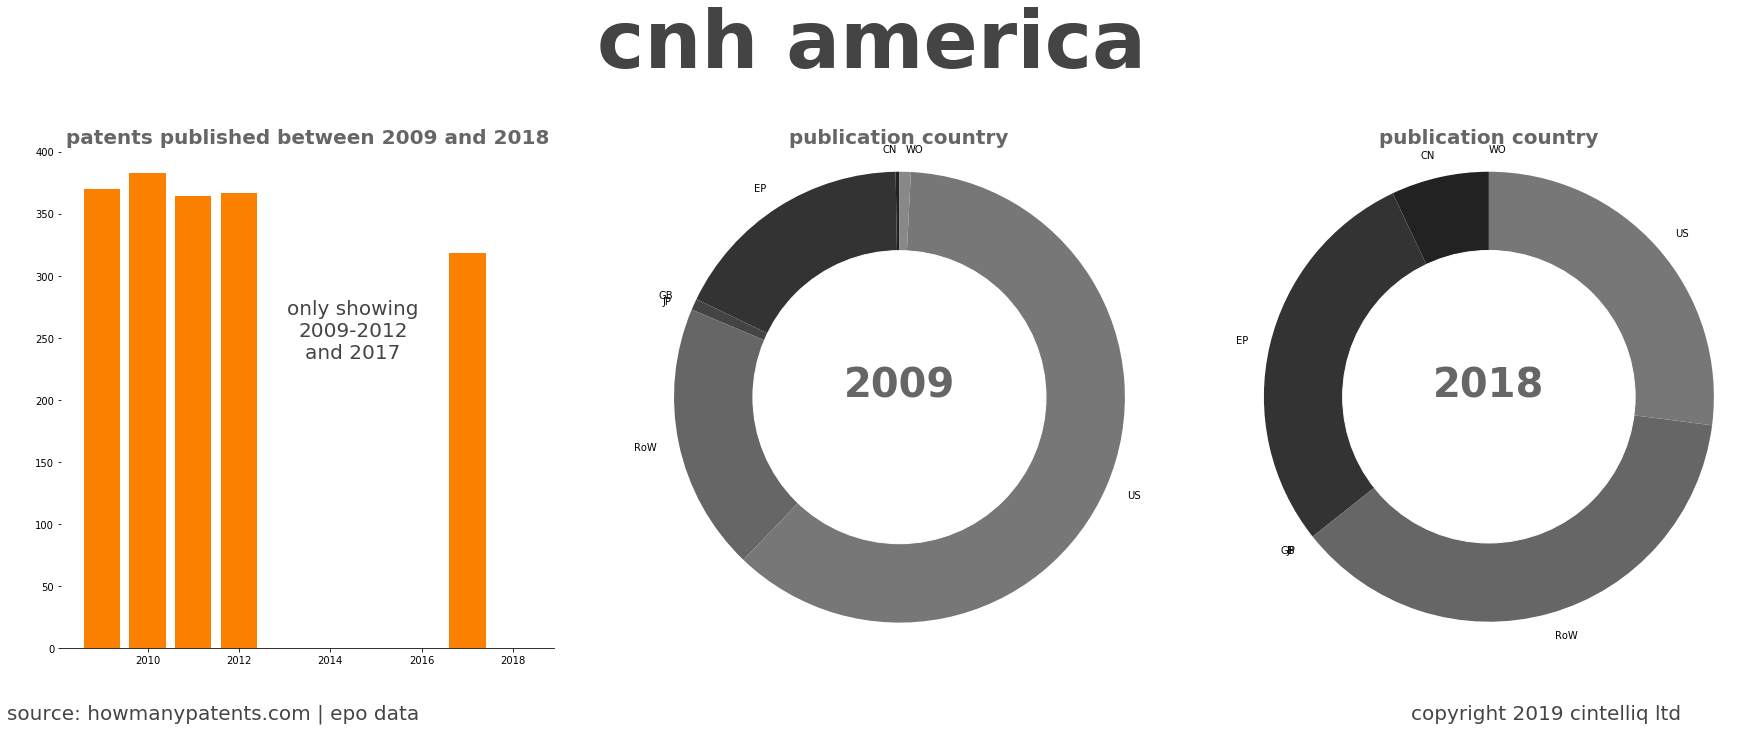 summary of patents for Cnh America